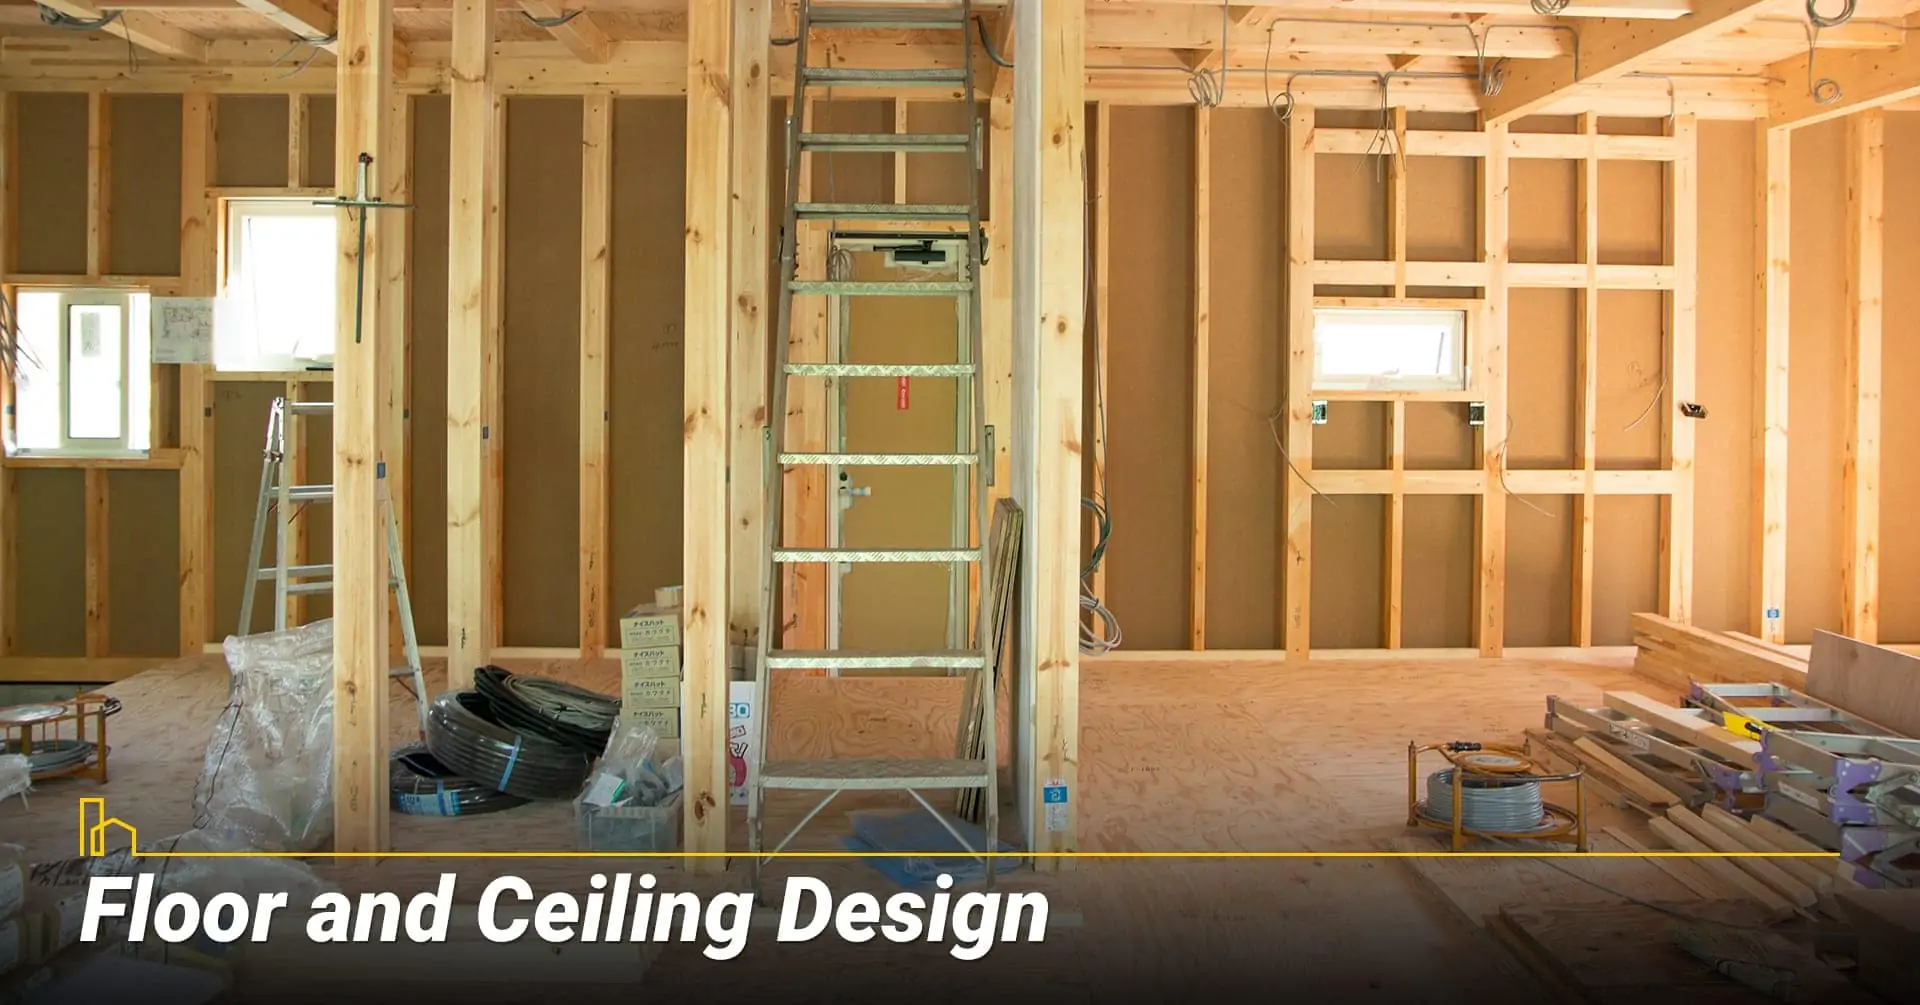 Floor and Ceiling Design, design your floor and ceiling